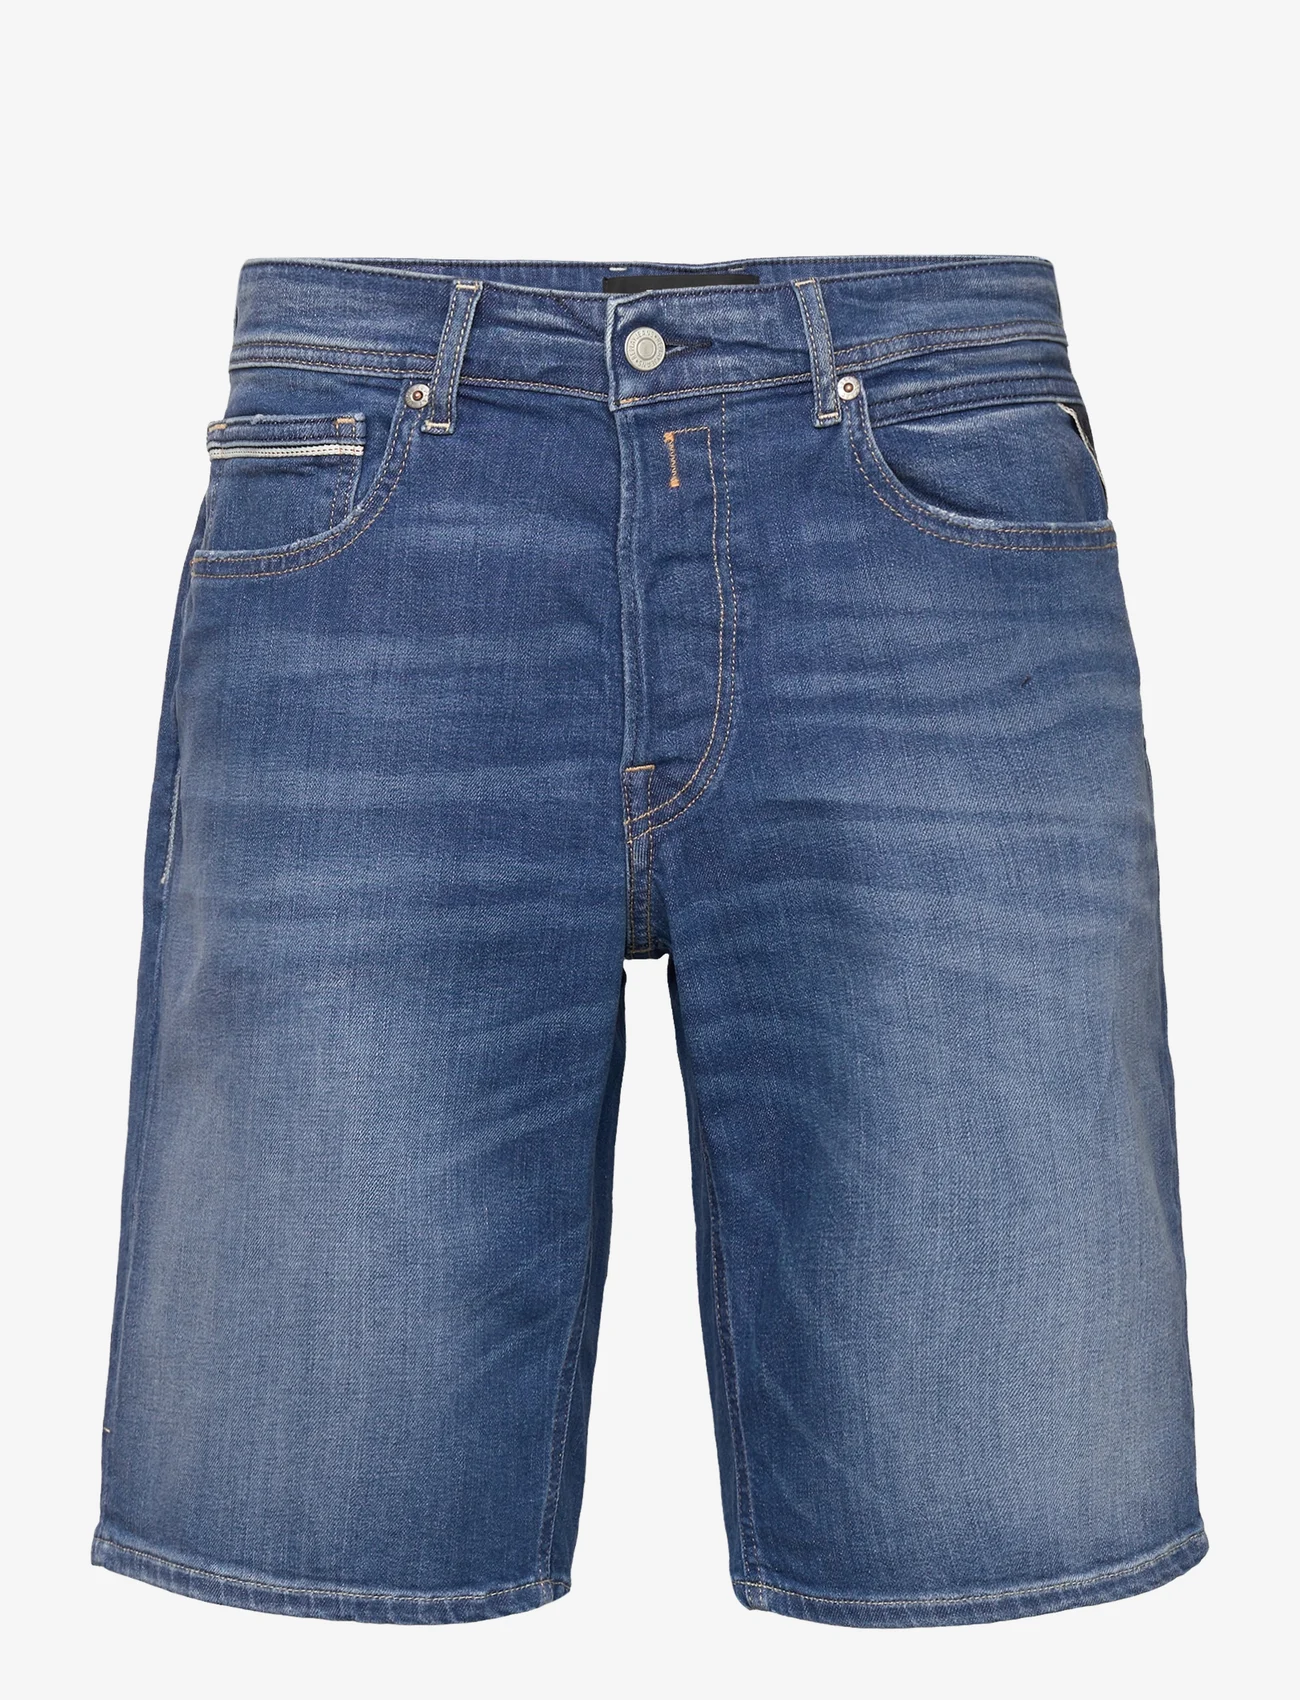 Replay - GROVER SHORT Shorts STRAIGHT 573 ONLINE - jeansowe szorty - blue - 0